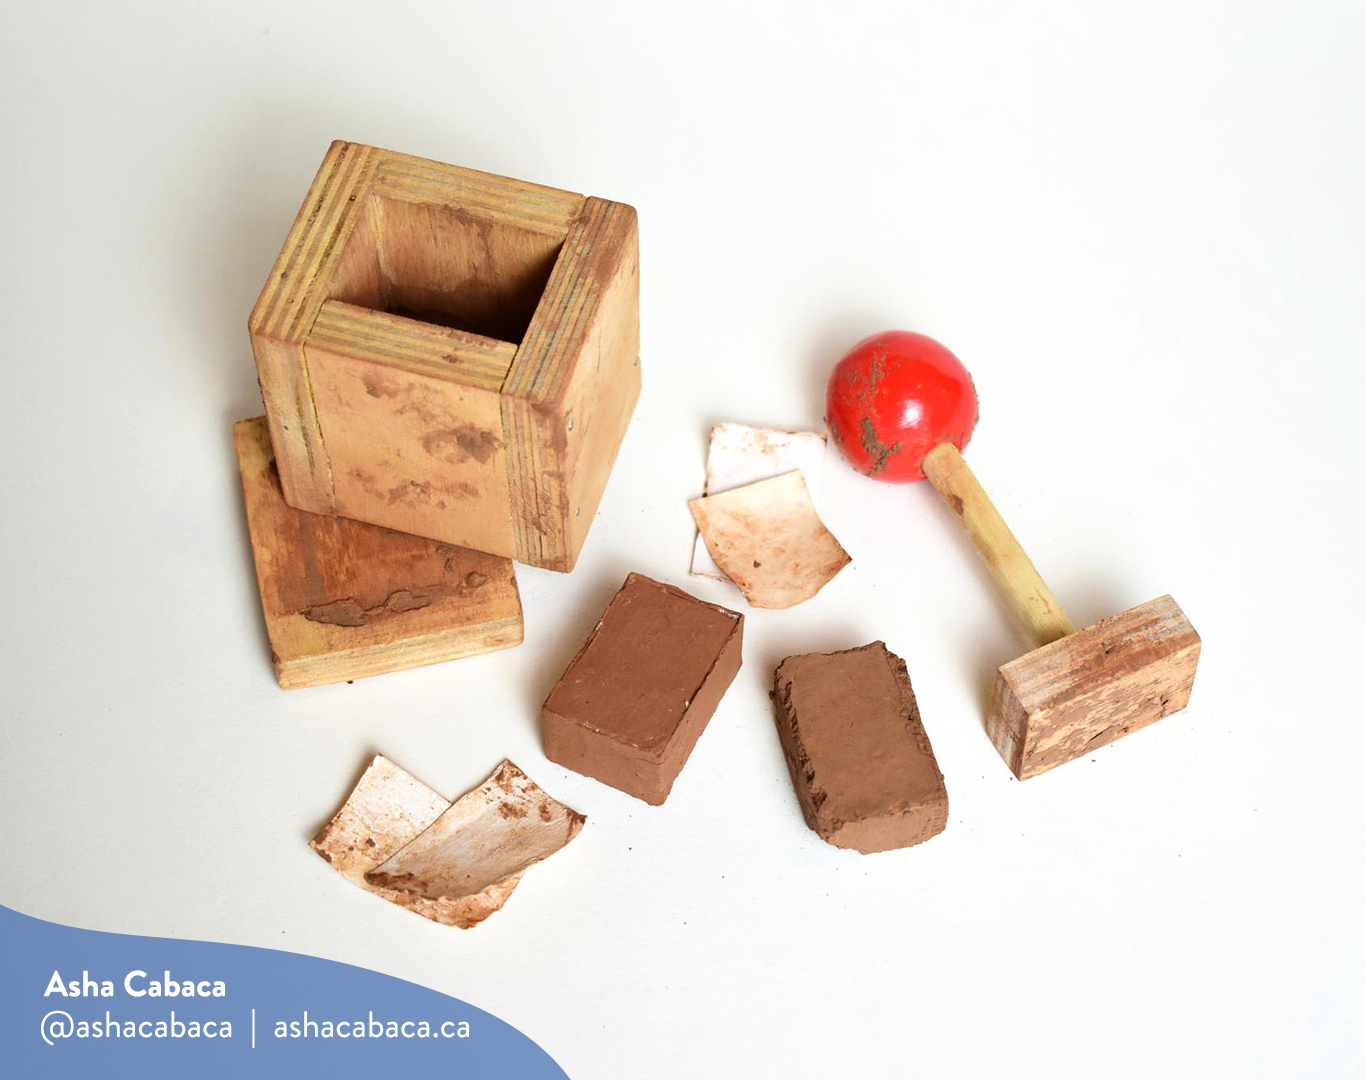 Horizontal photo of artwork by Asha Cabaca, it features a wooden box & a stick with a red handle used to shape mud into a brick, it lays on a white surface. There is a watermark in blue that has Asha’s name, Instagram handle (@ashacabaca) and website (ashacabaca.ca).